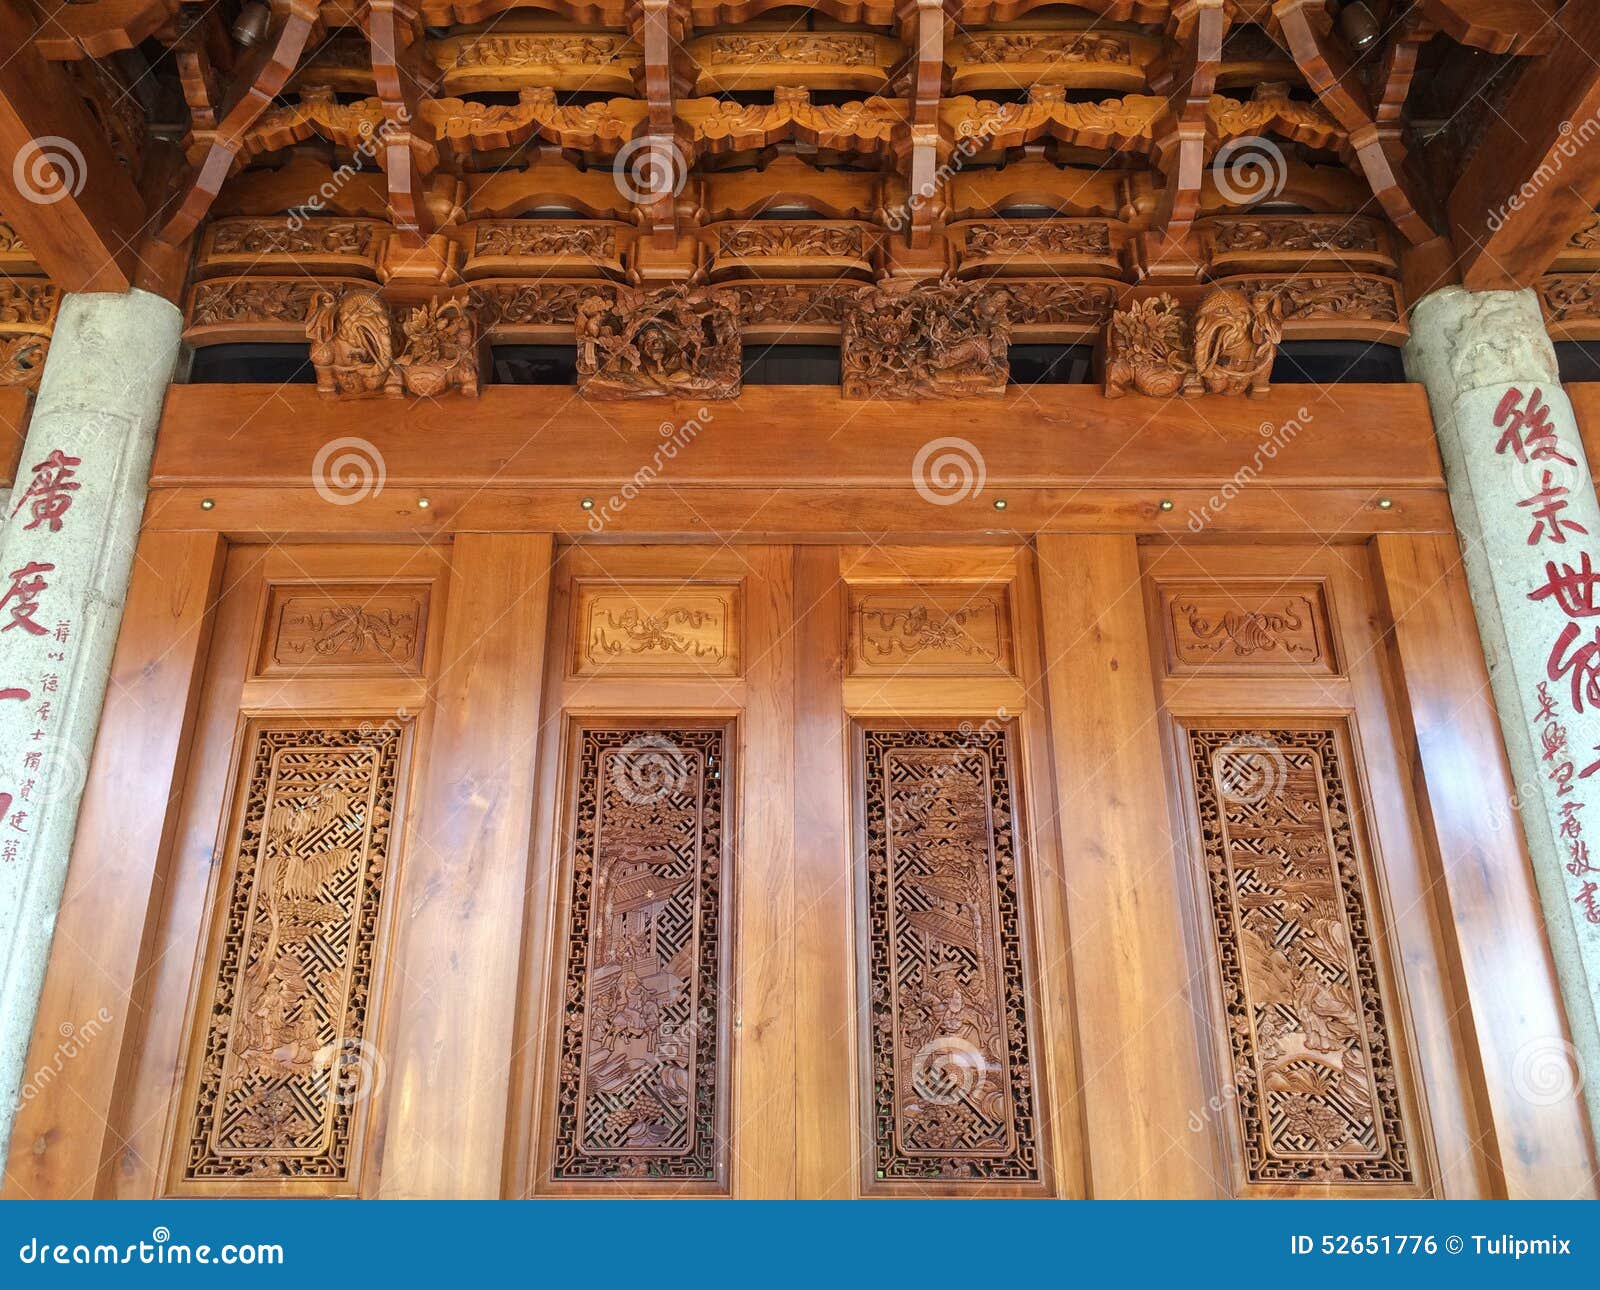 Delicate wood carving at Nanputuo Temple in Xiamen city, China. Delicate wood carving at Nanputuo Buddhist Temple in Xiamen city, southeast China. The temple has a history of more than 1,000 years and is the most famous temple in Fujian province.